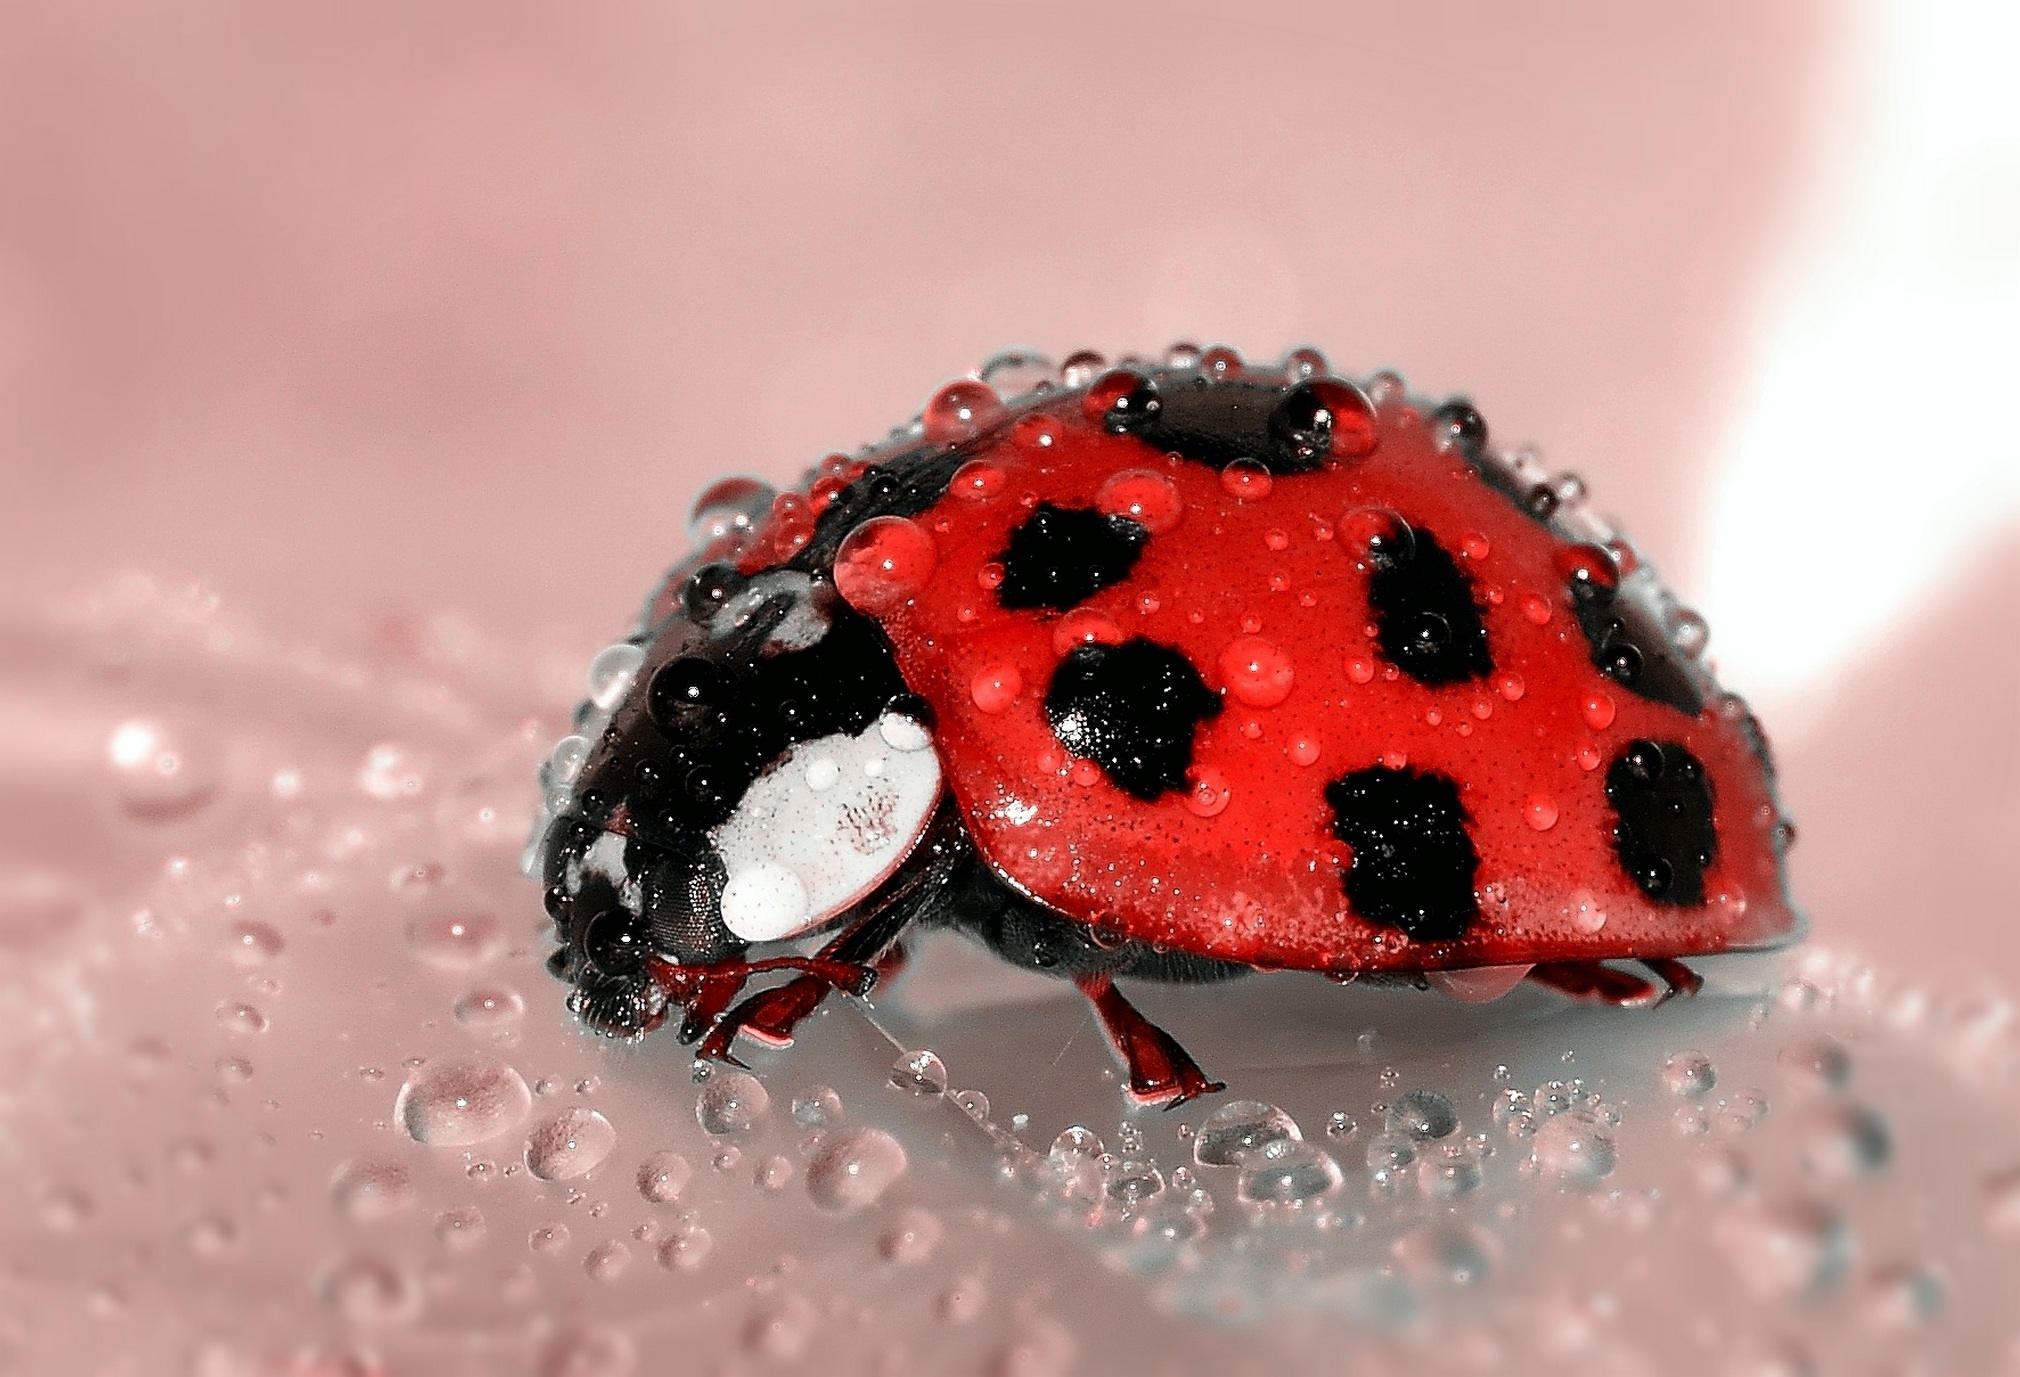 Free Images : nature, dew, water drop, red, insect, ladybug, bug ...